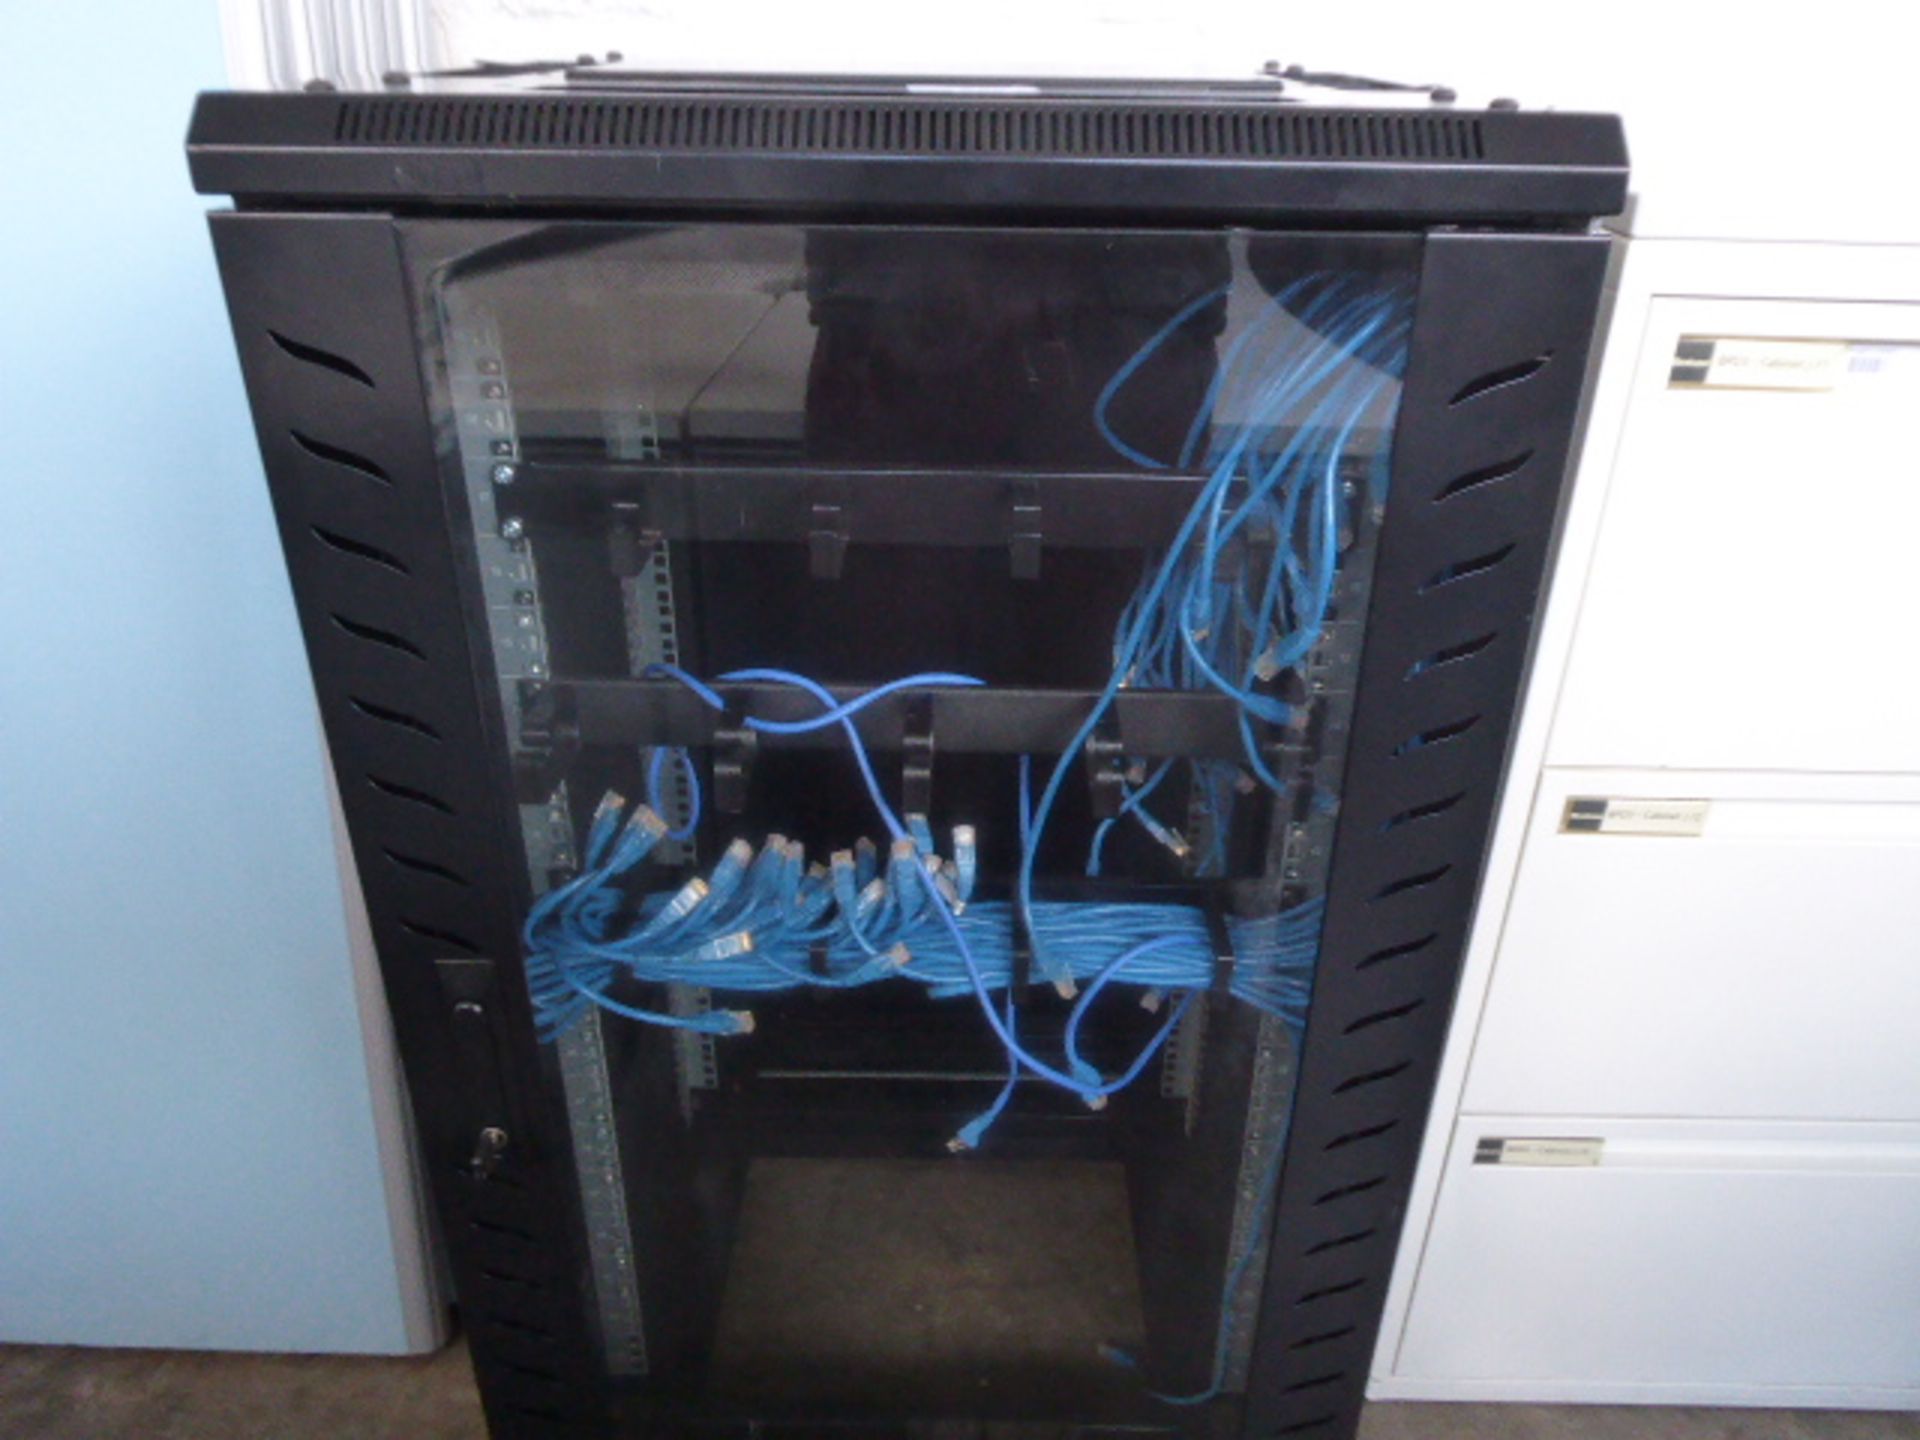 60cm comms cabinet with network cables - Image 3 of 3